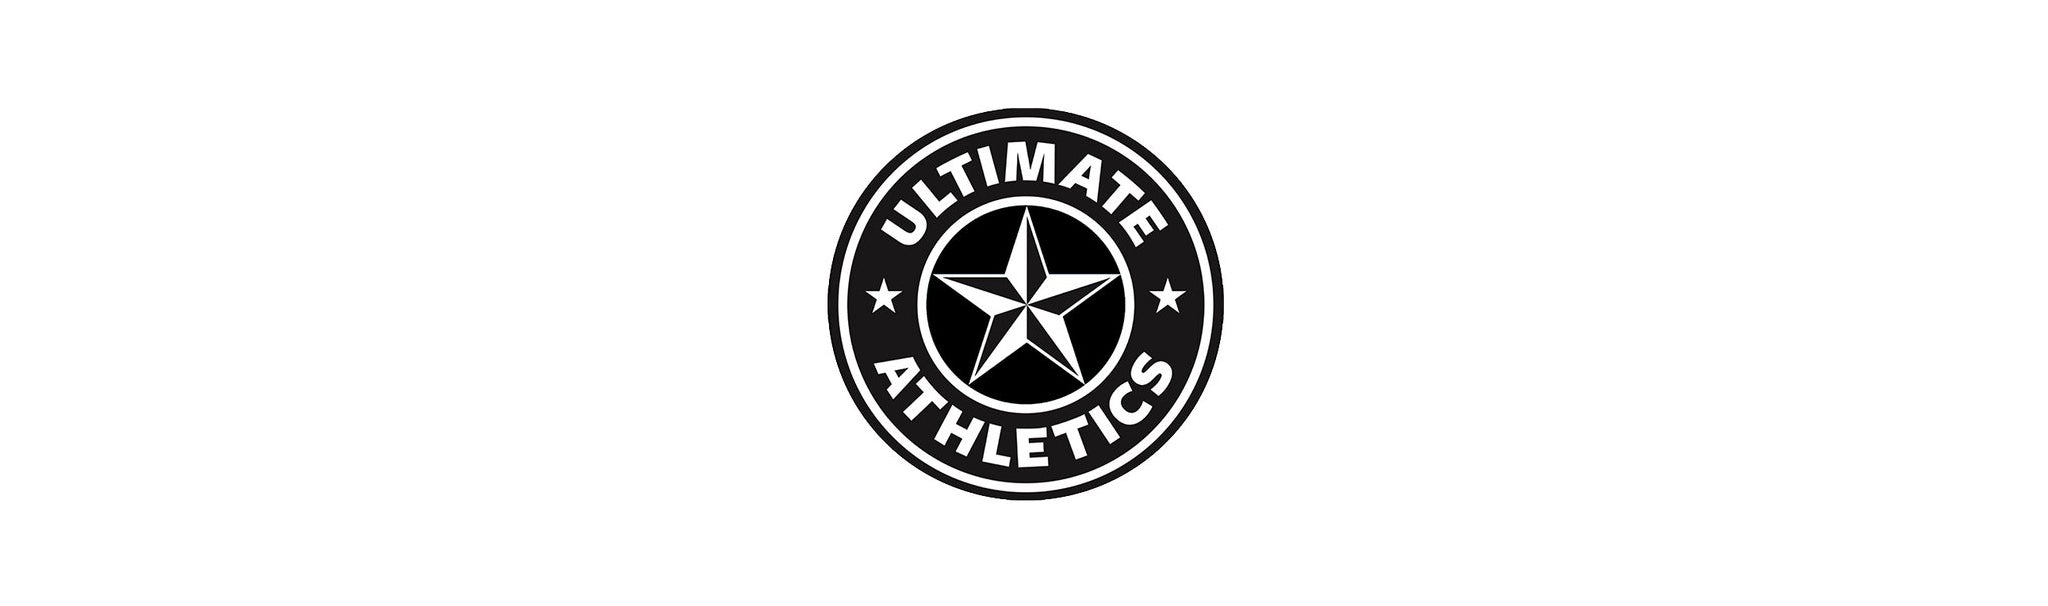 Province of Canada X Ultimate Athletics